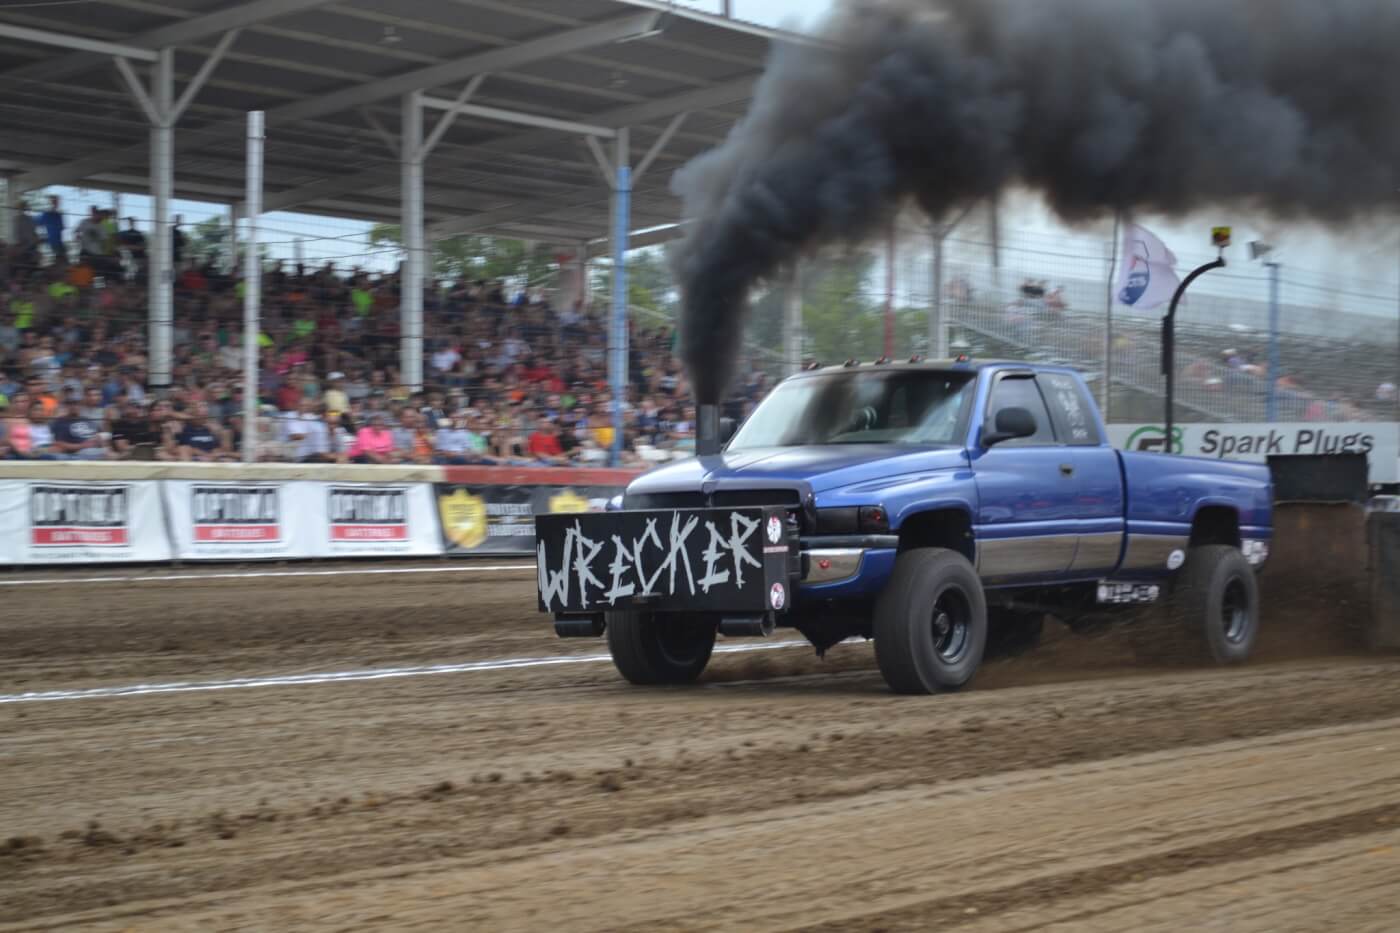 As you can see by the chassis flex on “The Wrecker,” sled pulling is an extremely demanding sport, which requires extensive upgrades to compete on a national level.